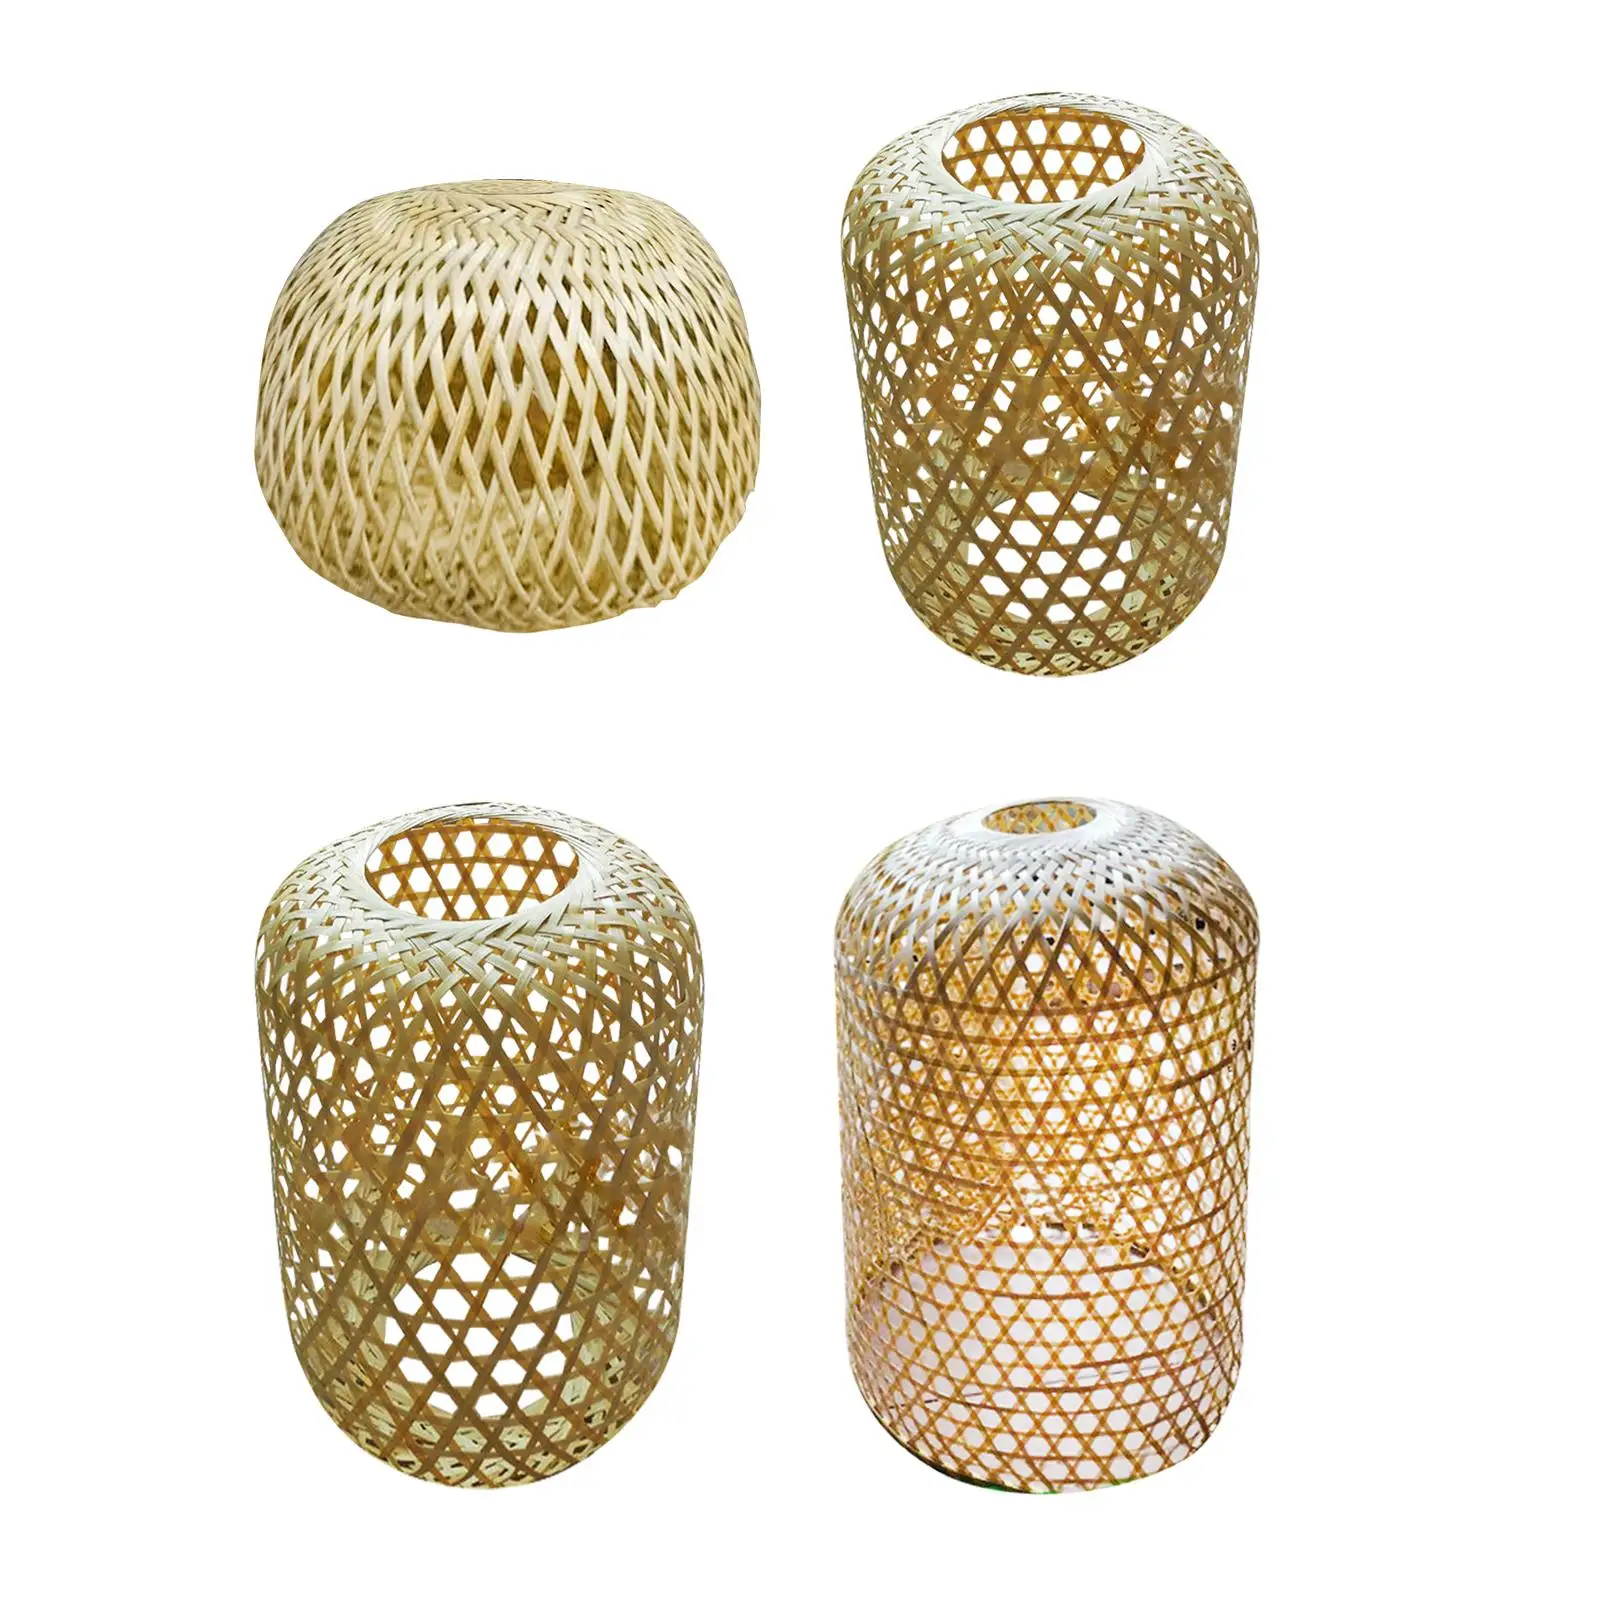 Bamboo Lamp Shade Pendant Light Cover Decorative Hanging Lantern Lamp Accessory for Bedroom Tea House Home Farm Decoration